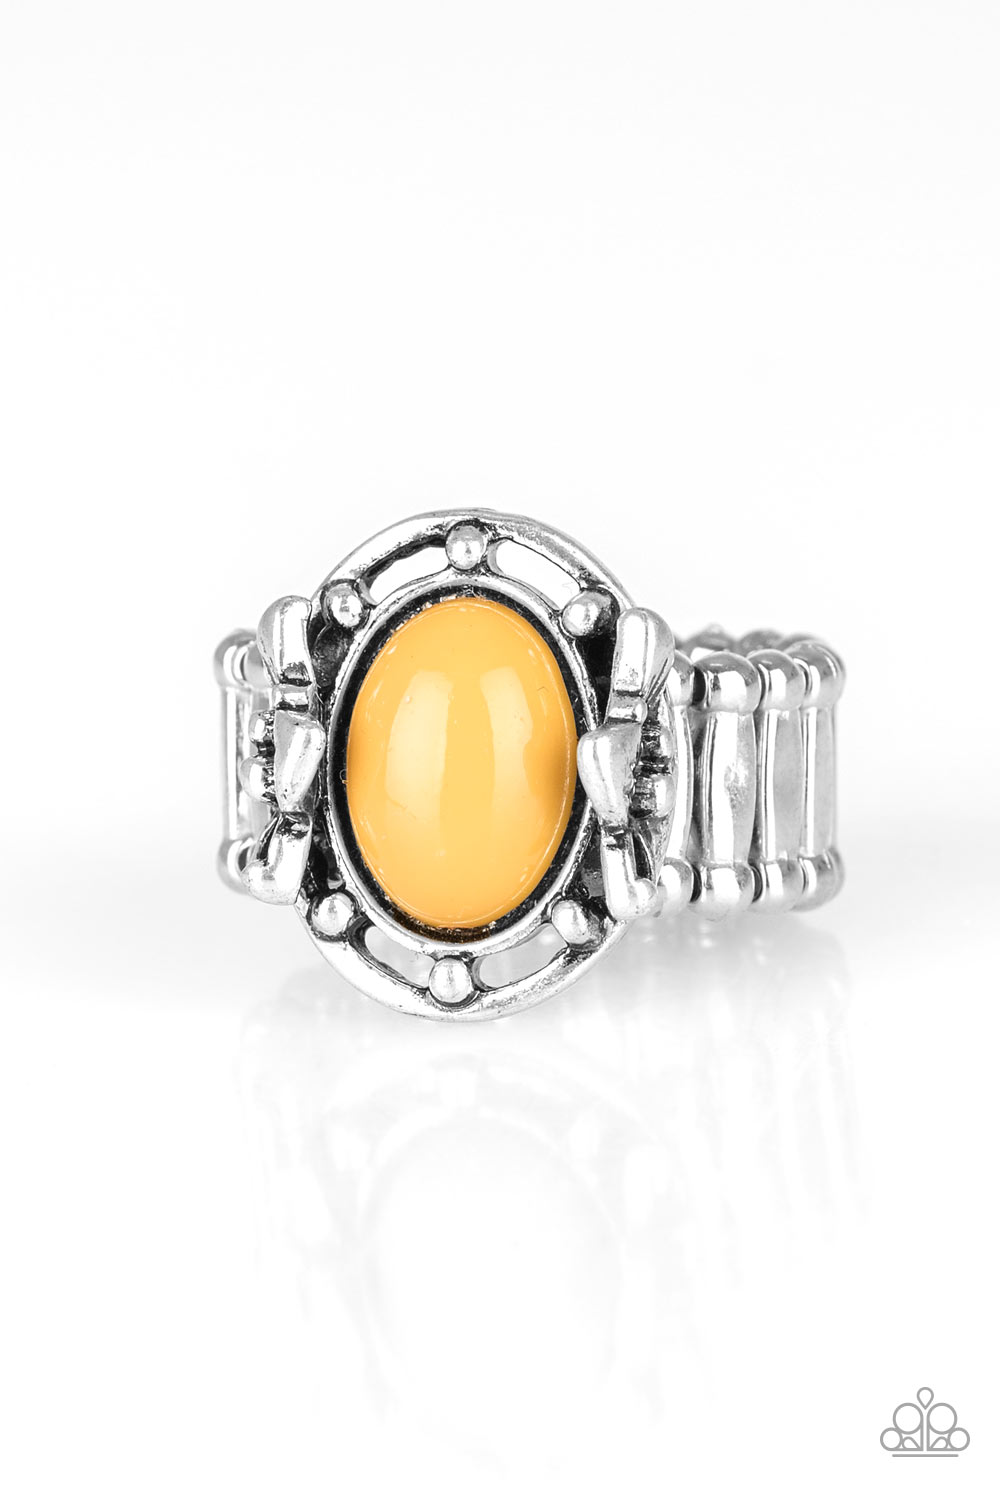 Paparazzi Rings - Color Me Confident - Yellow